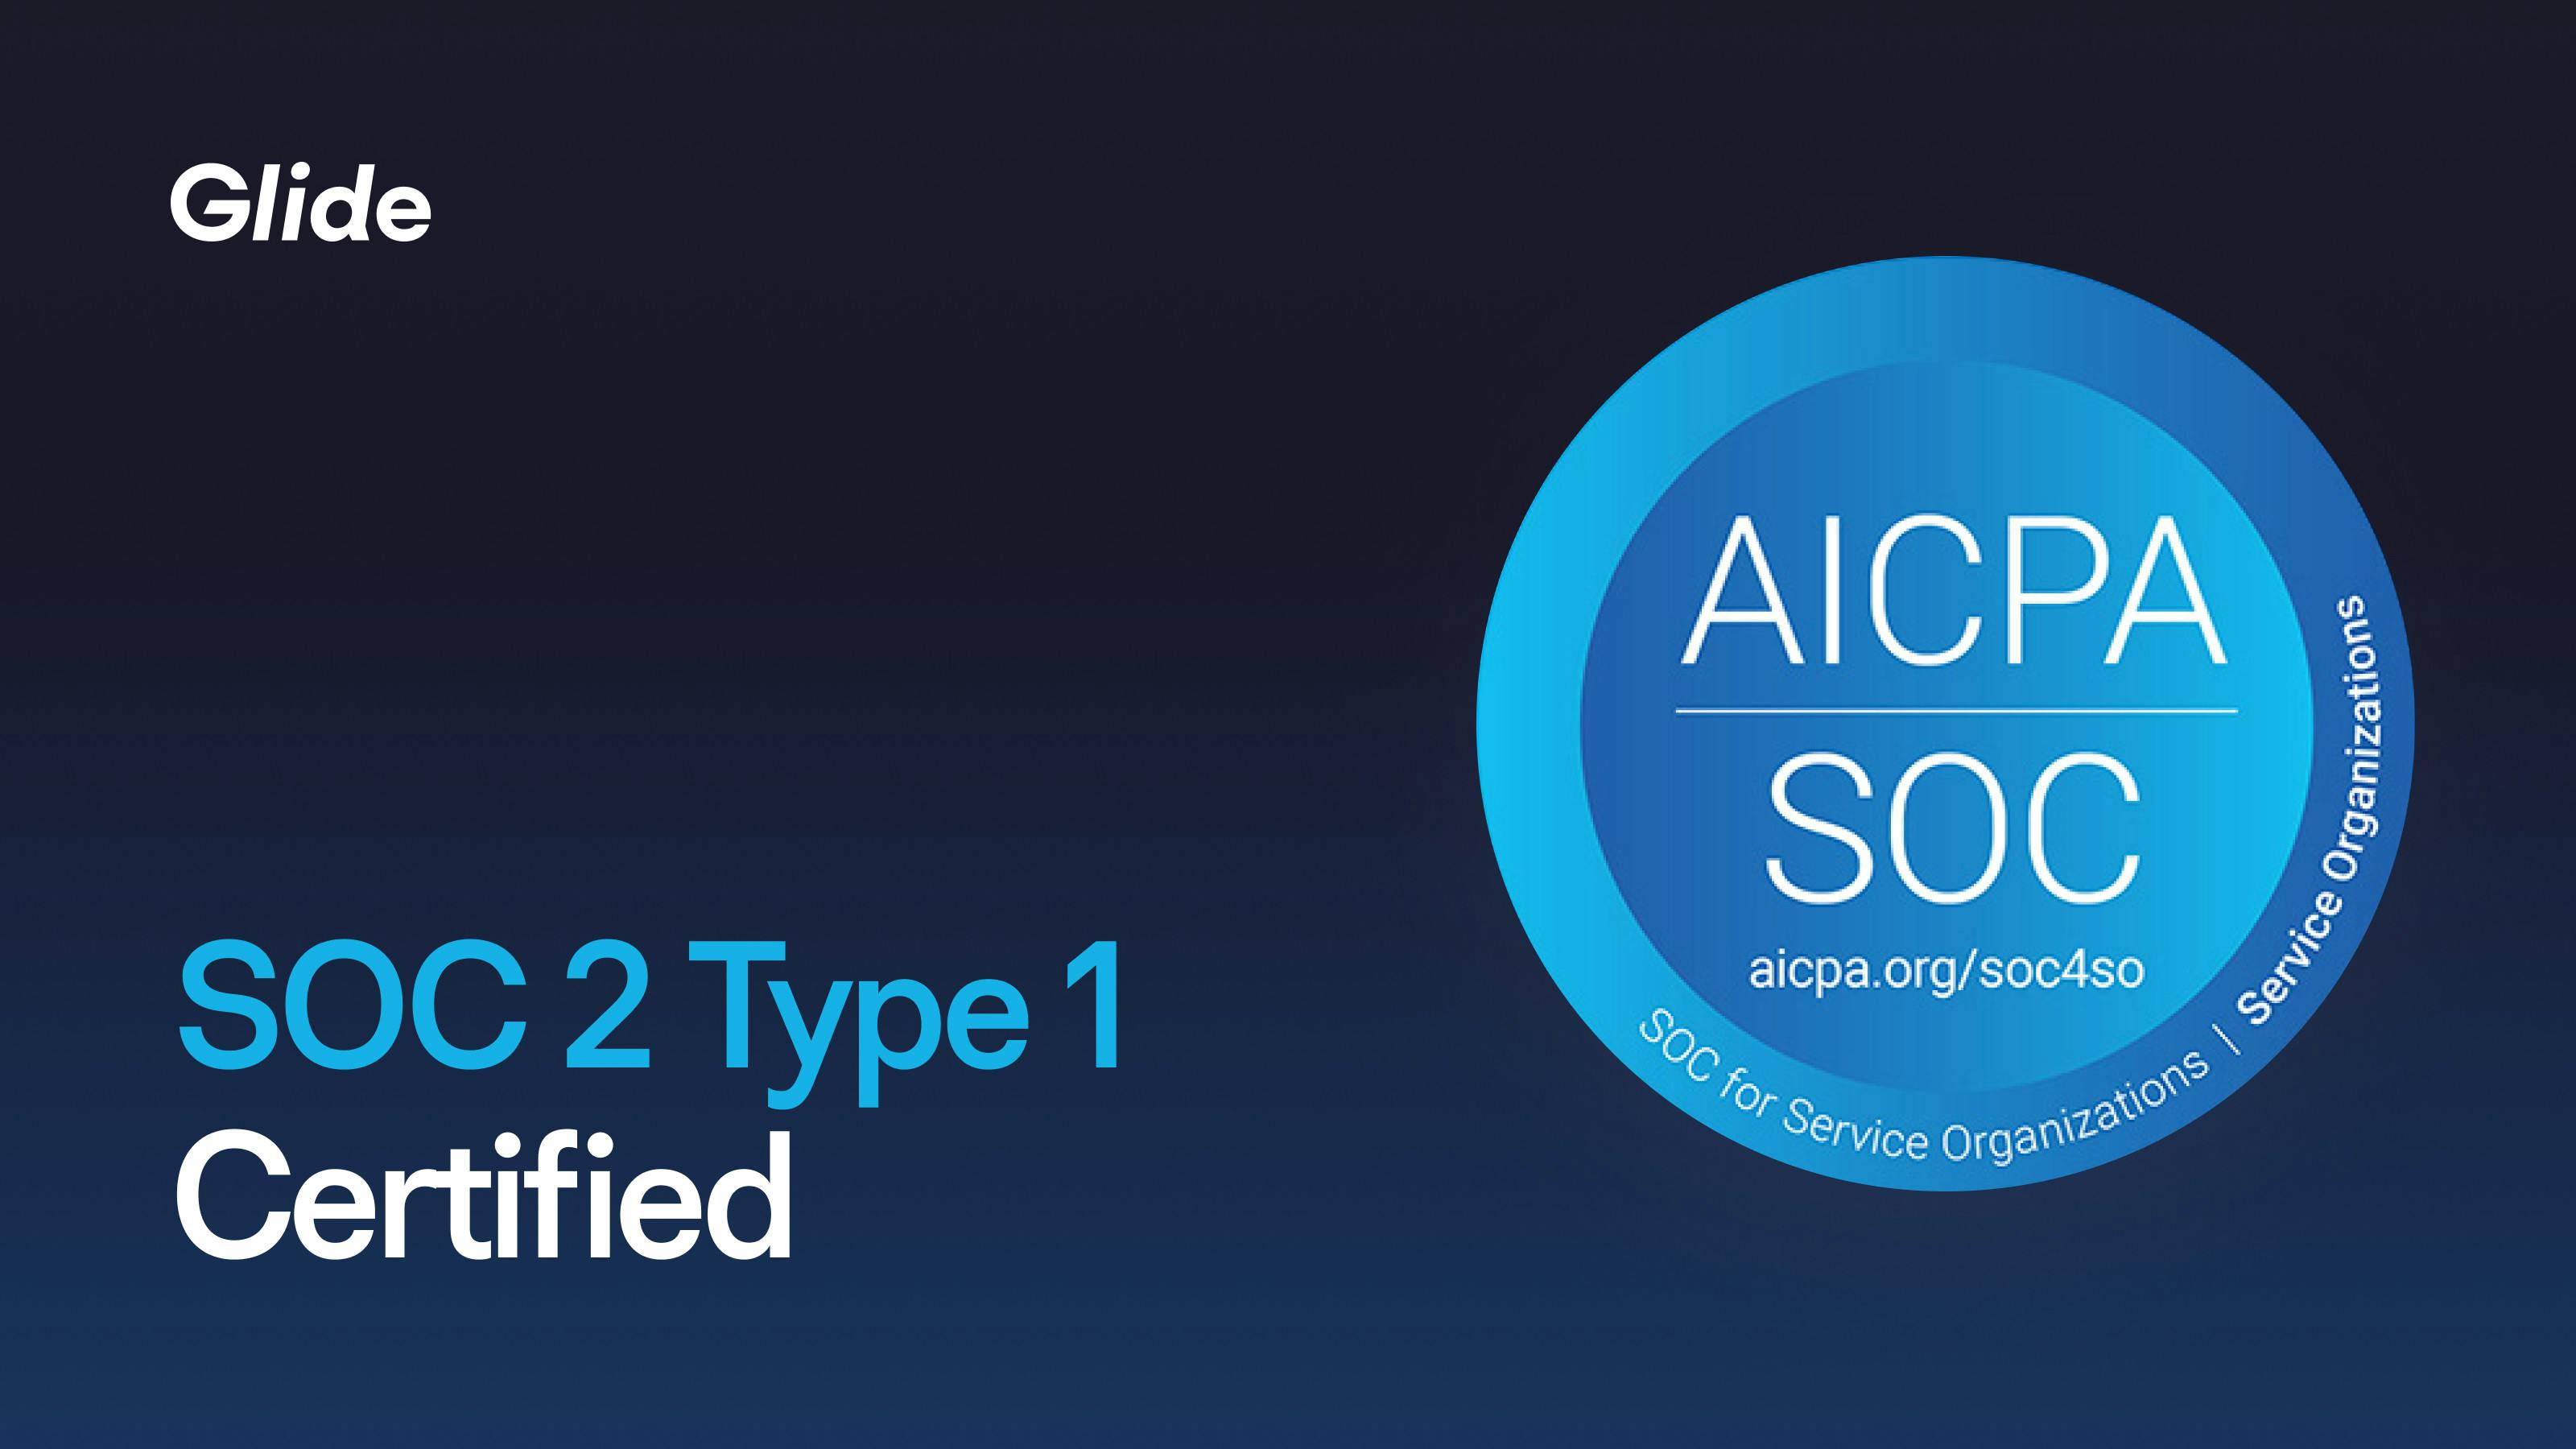 Glide is Officially SOC 2 Type 1 Certified